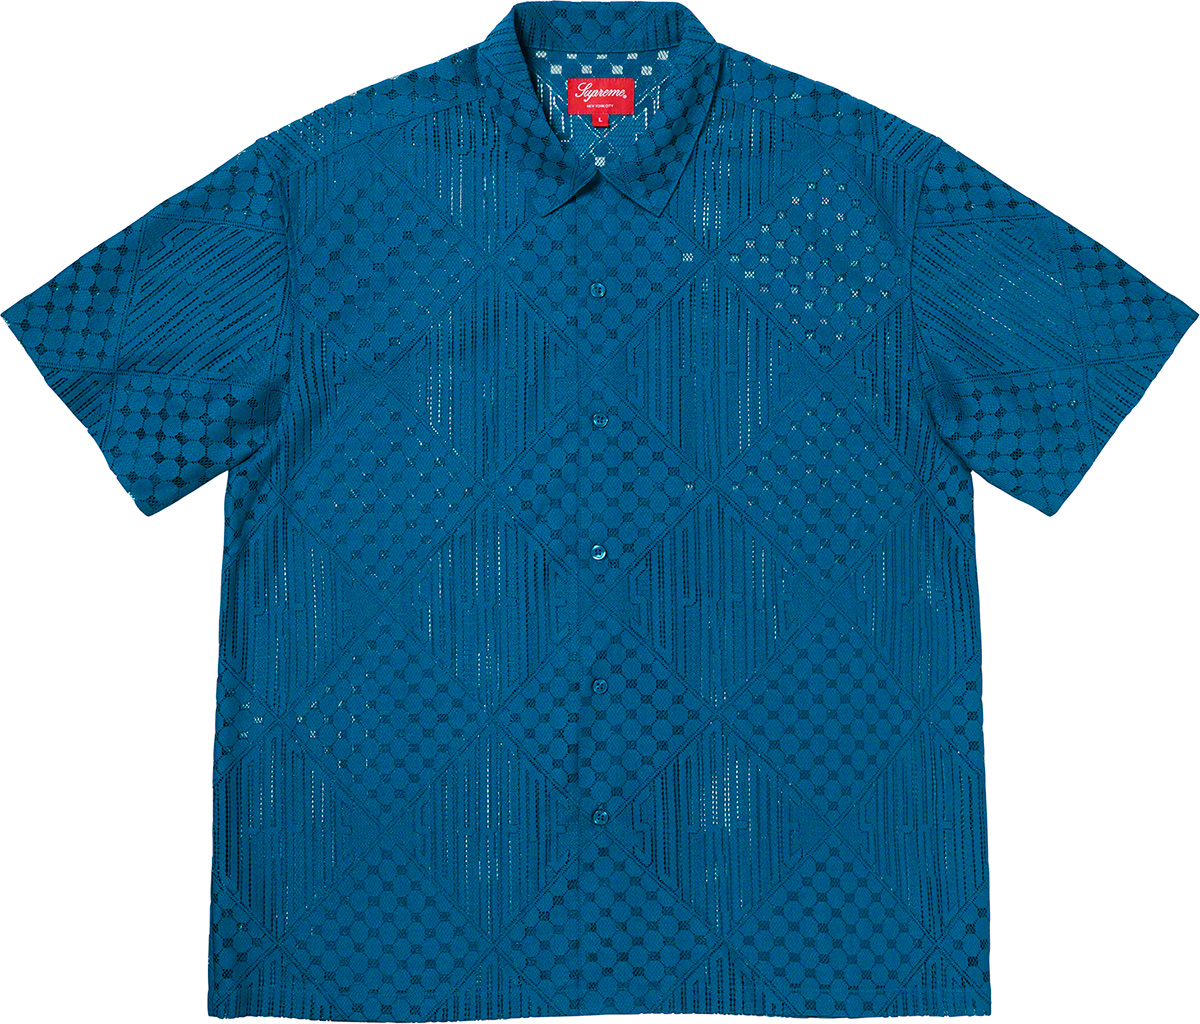 Lace S S Shirt - spring summer 2020 - Supreme